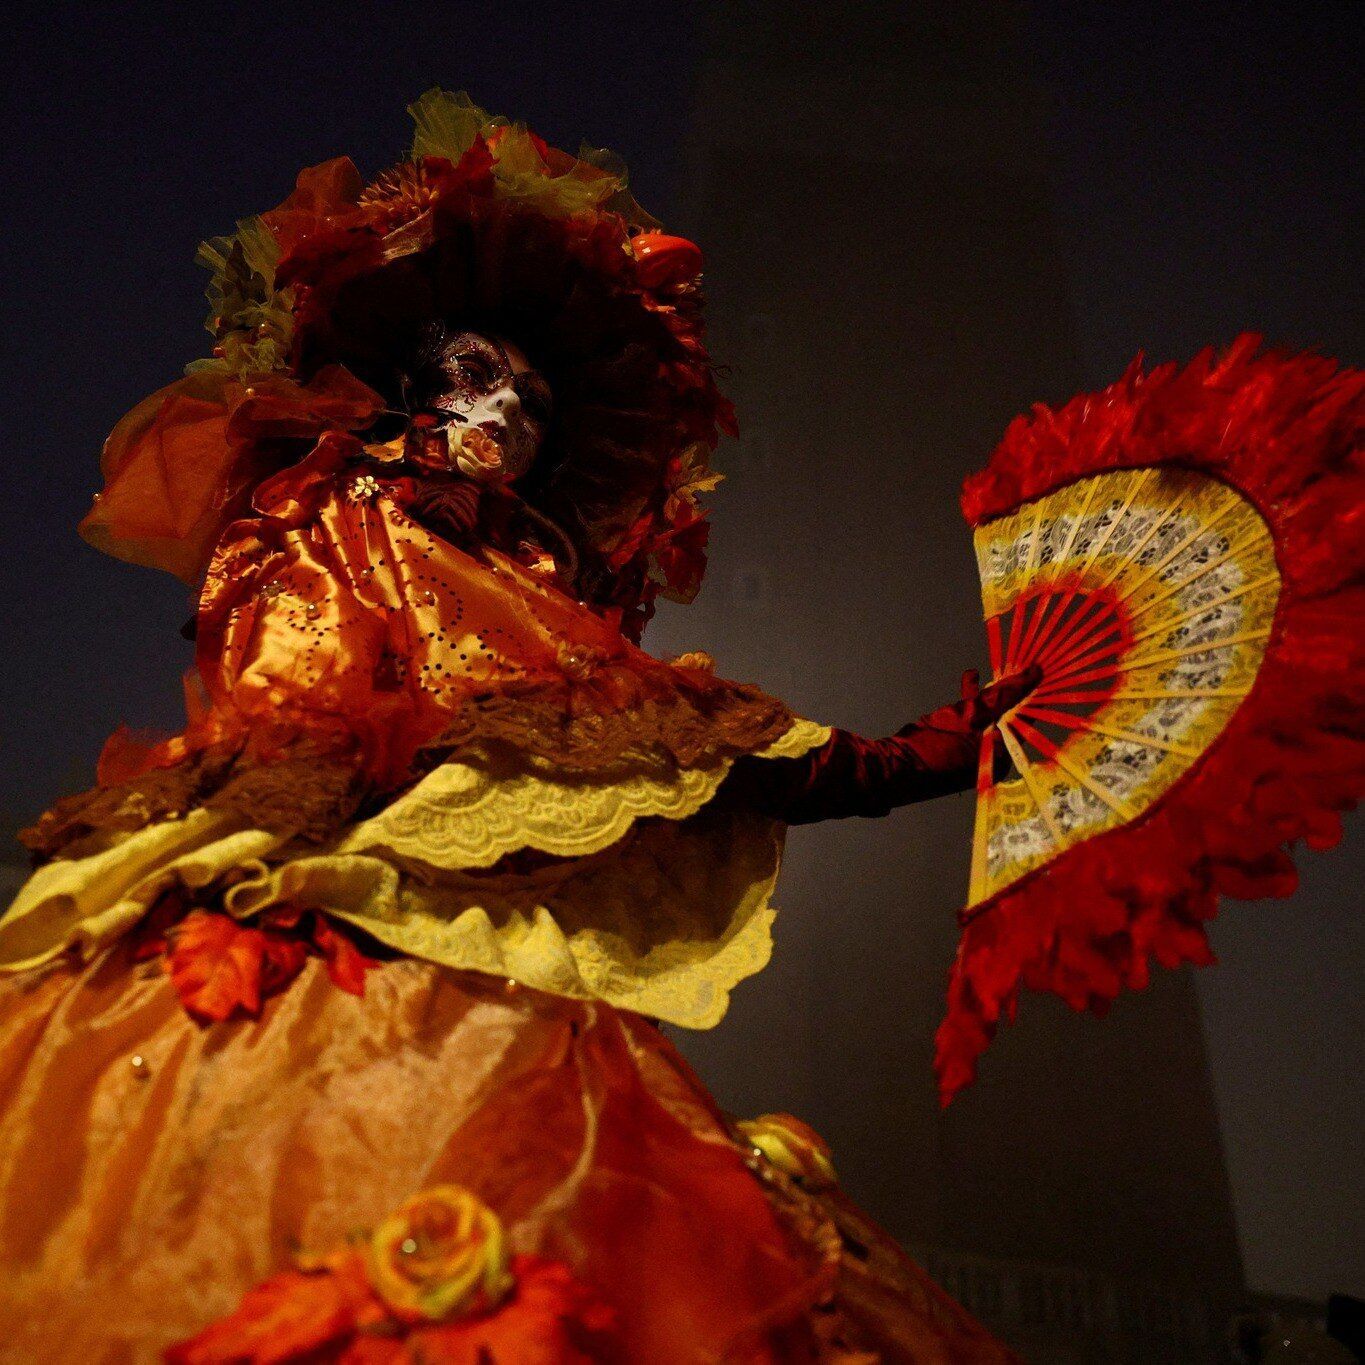 The magic of the Venice Carnival: ice dancing, theater and museum discoveries